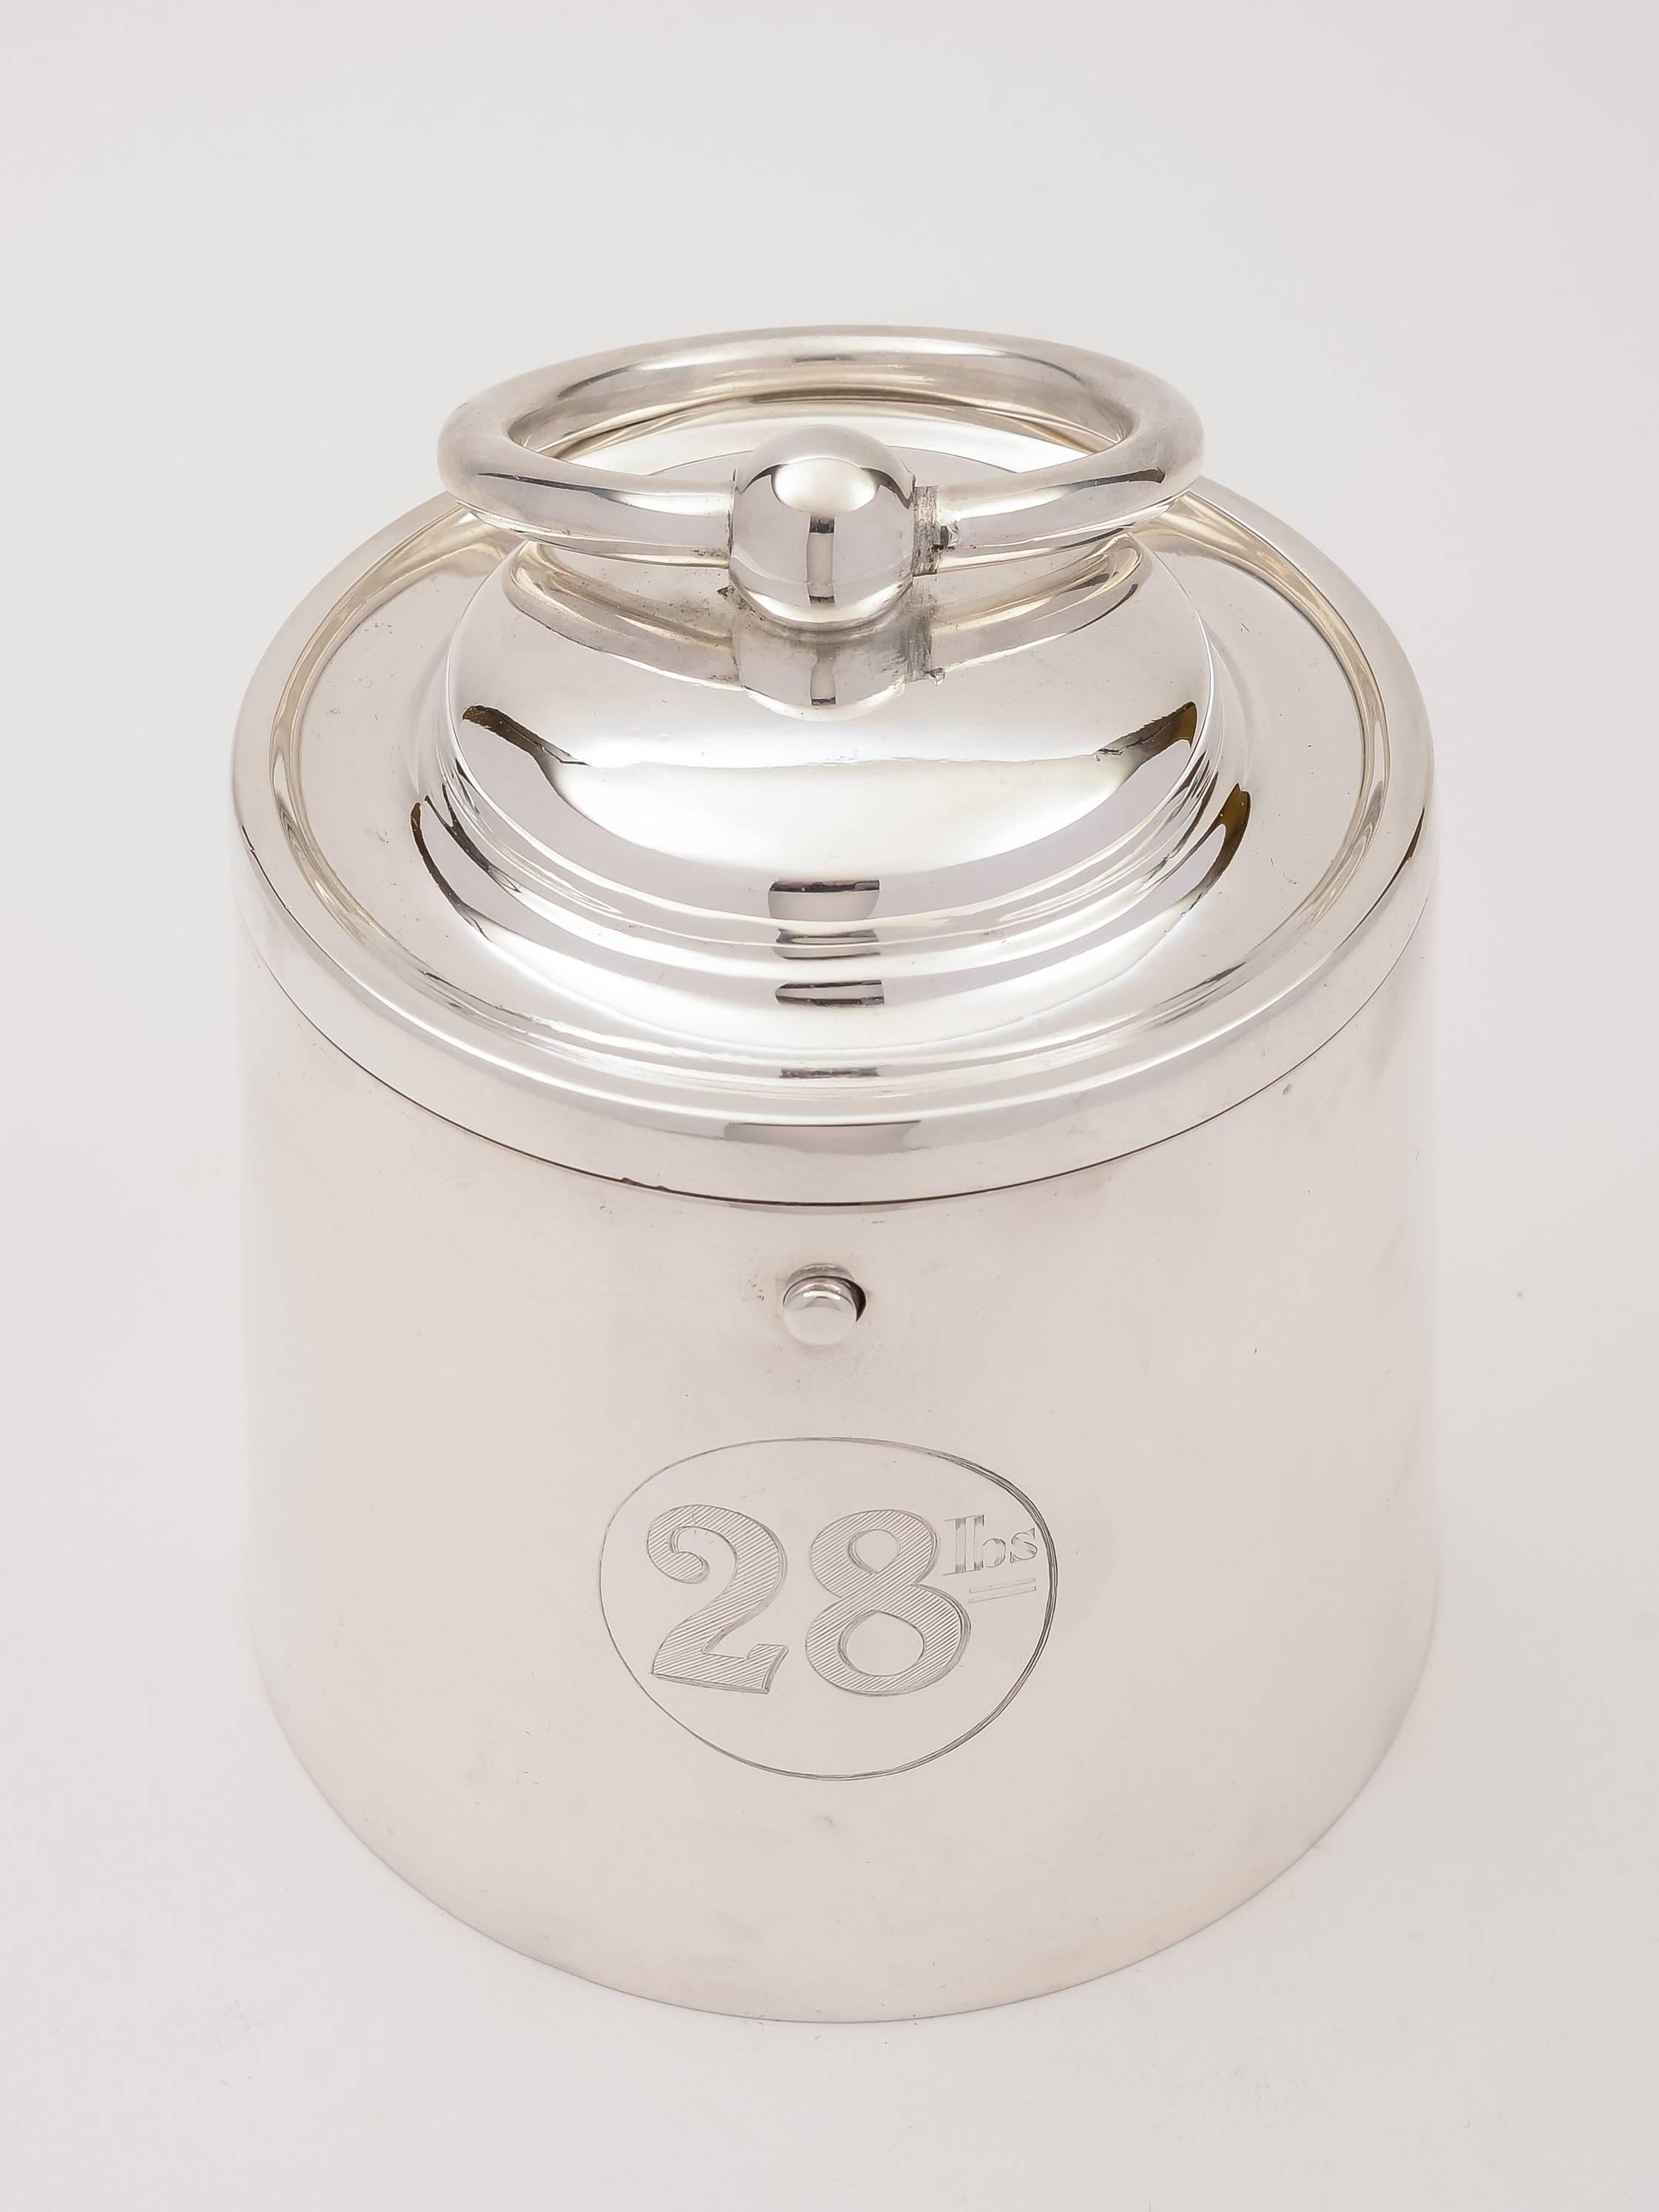 An unusual Victorian silver plated biscuit or cookie jar in the shape of a 28lb weight. There is a button to press on the front of the box which opens and locks it, allowing you to carry it with ease. It is also engraved on the front '28lb', circa